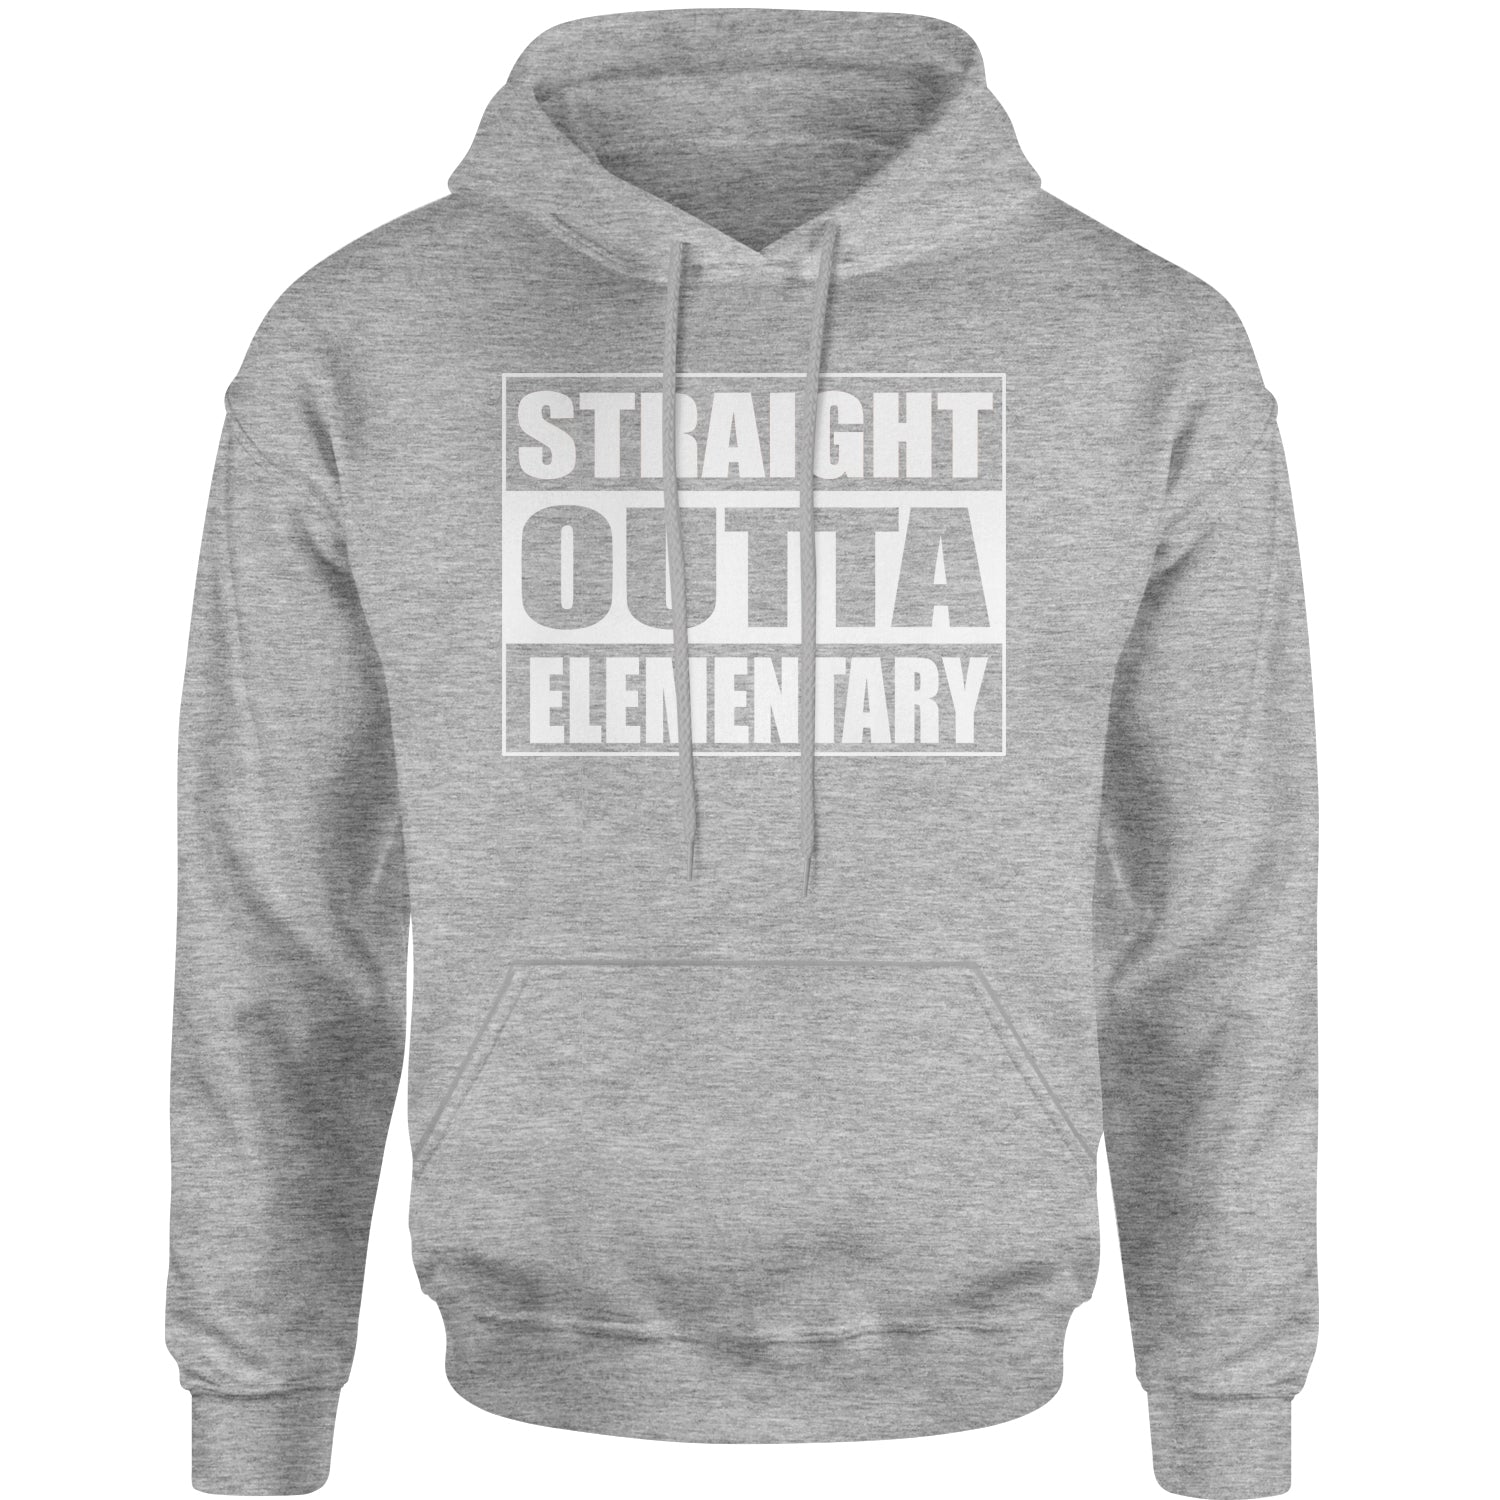 Straight Outta Elementary Adult Hoodie Sweatshirt 2020, 2021, 2022, class, of, quarantine, queen by Expression Tees